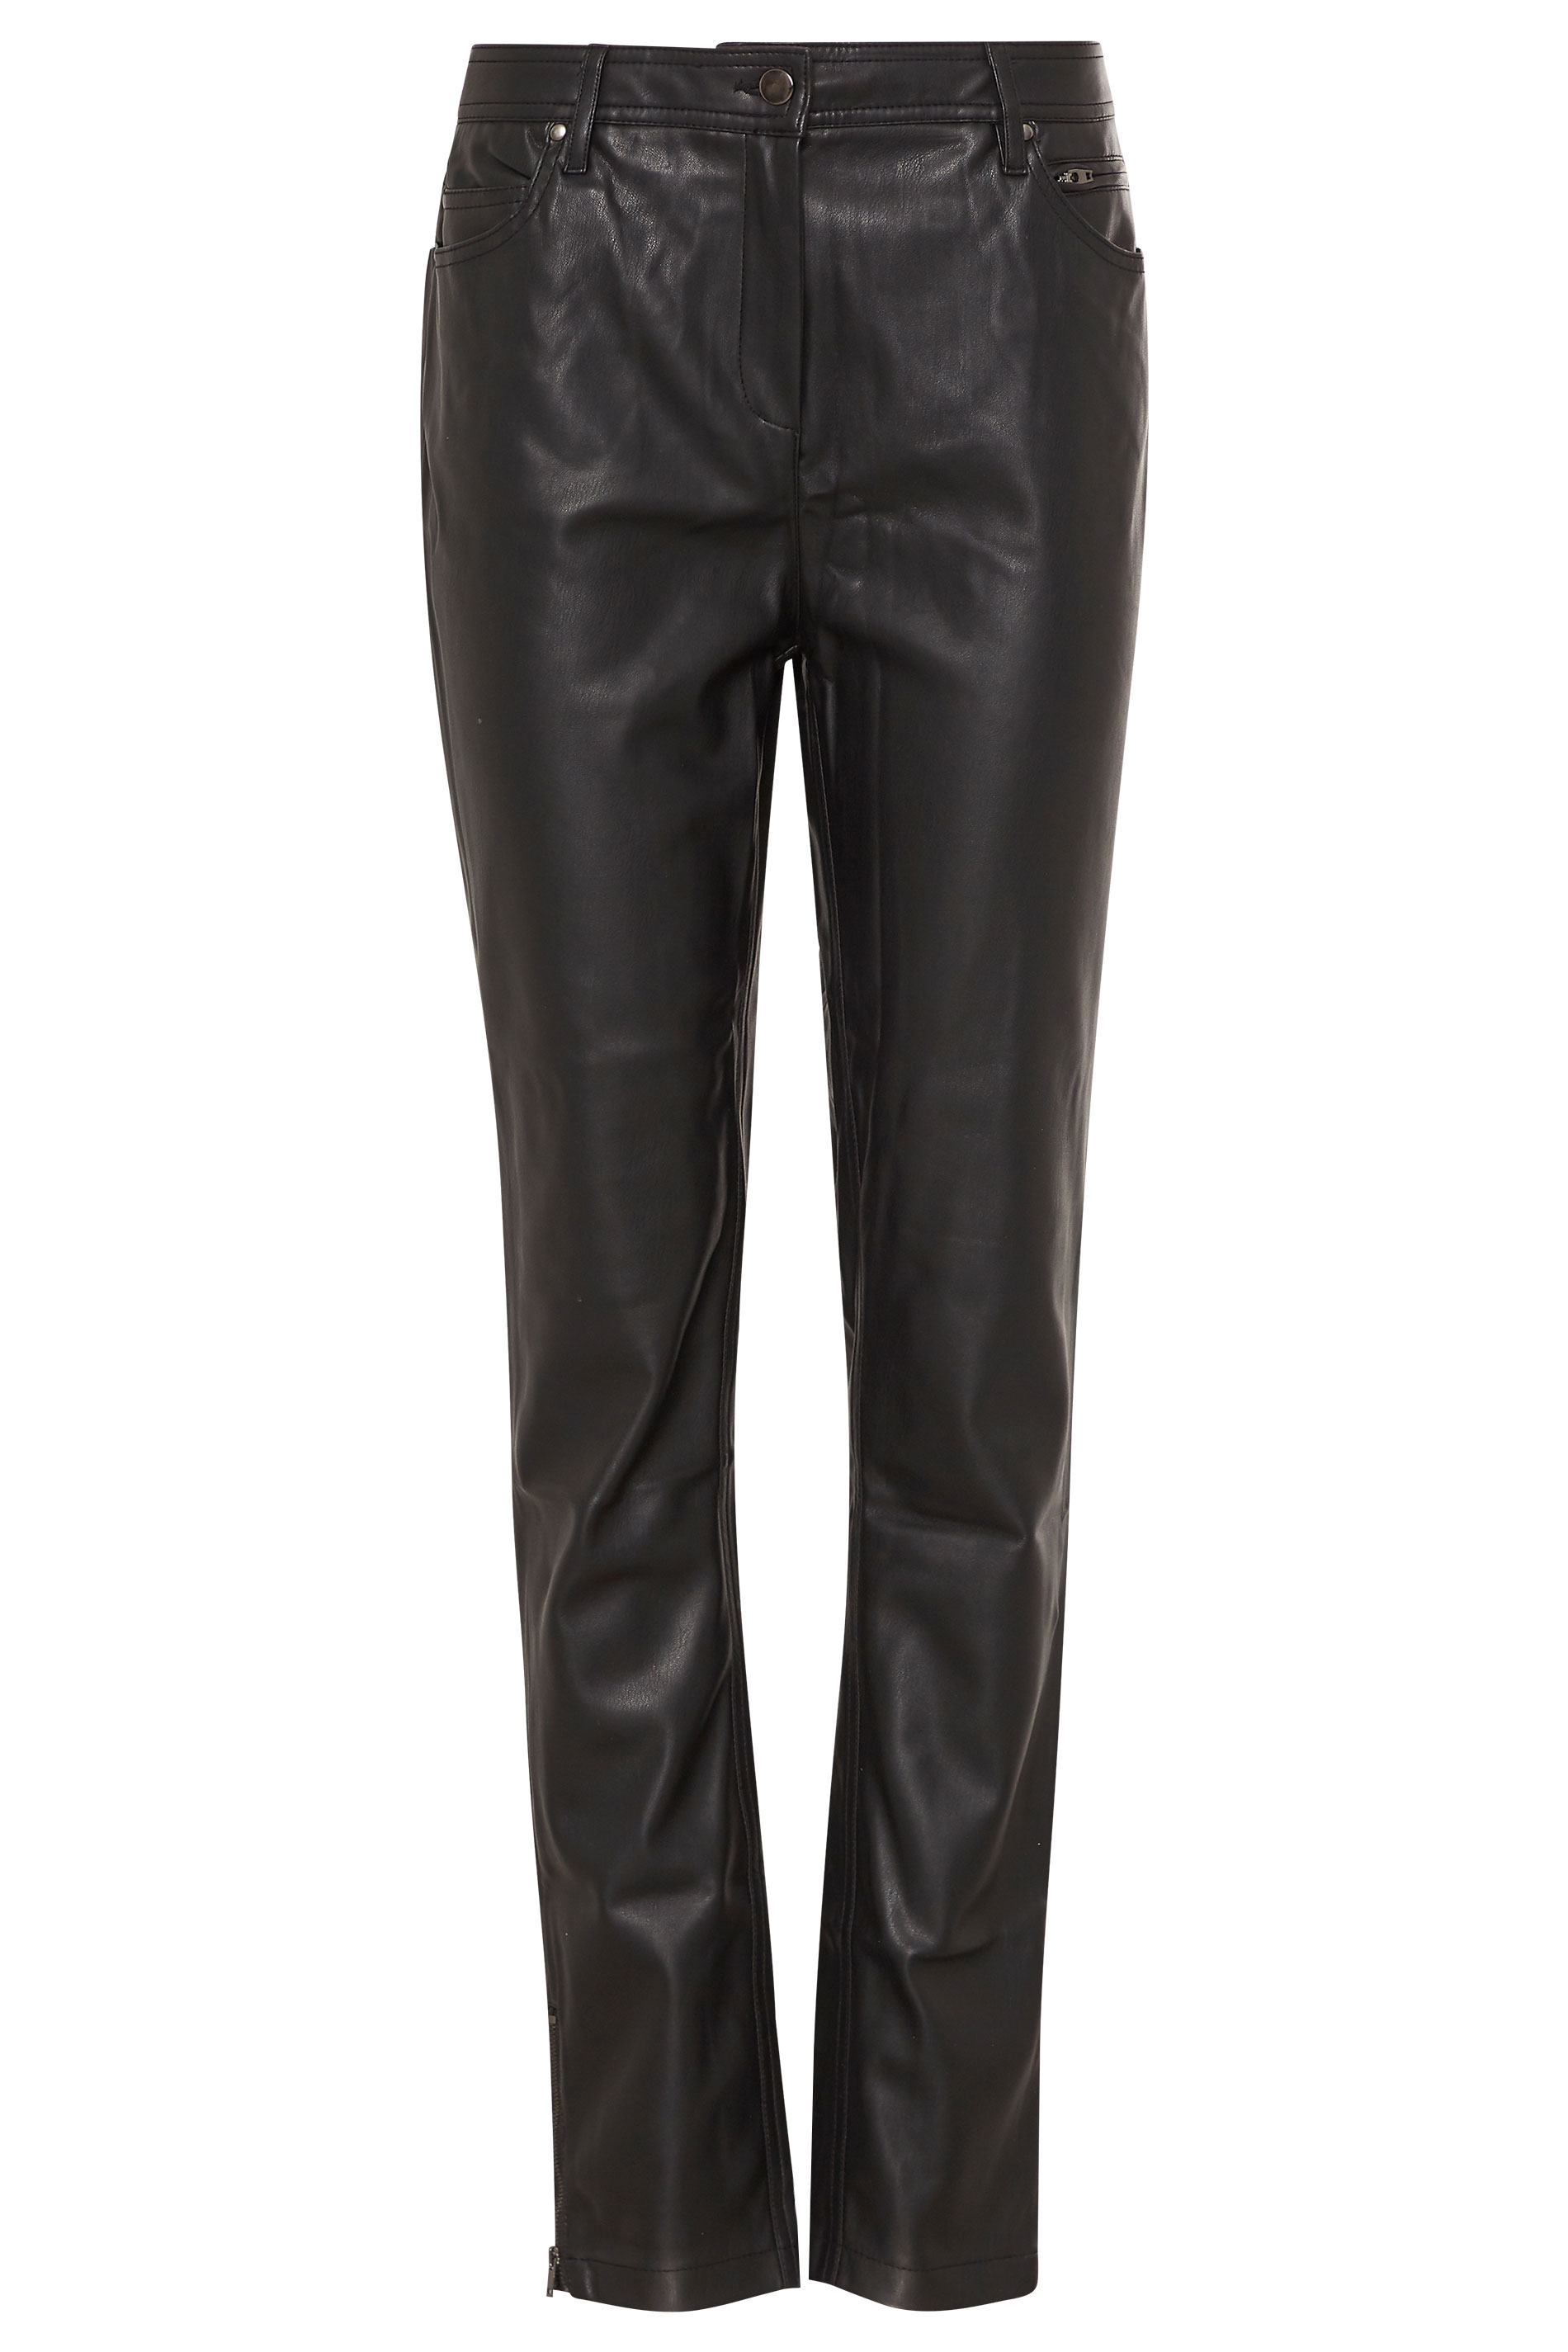 Black Faux Leather Skinny Trouser Jeans | Long Tall Sally